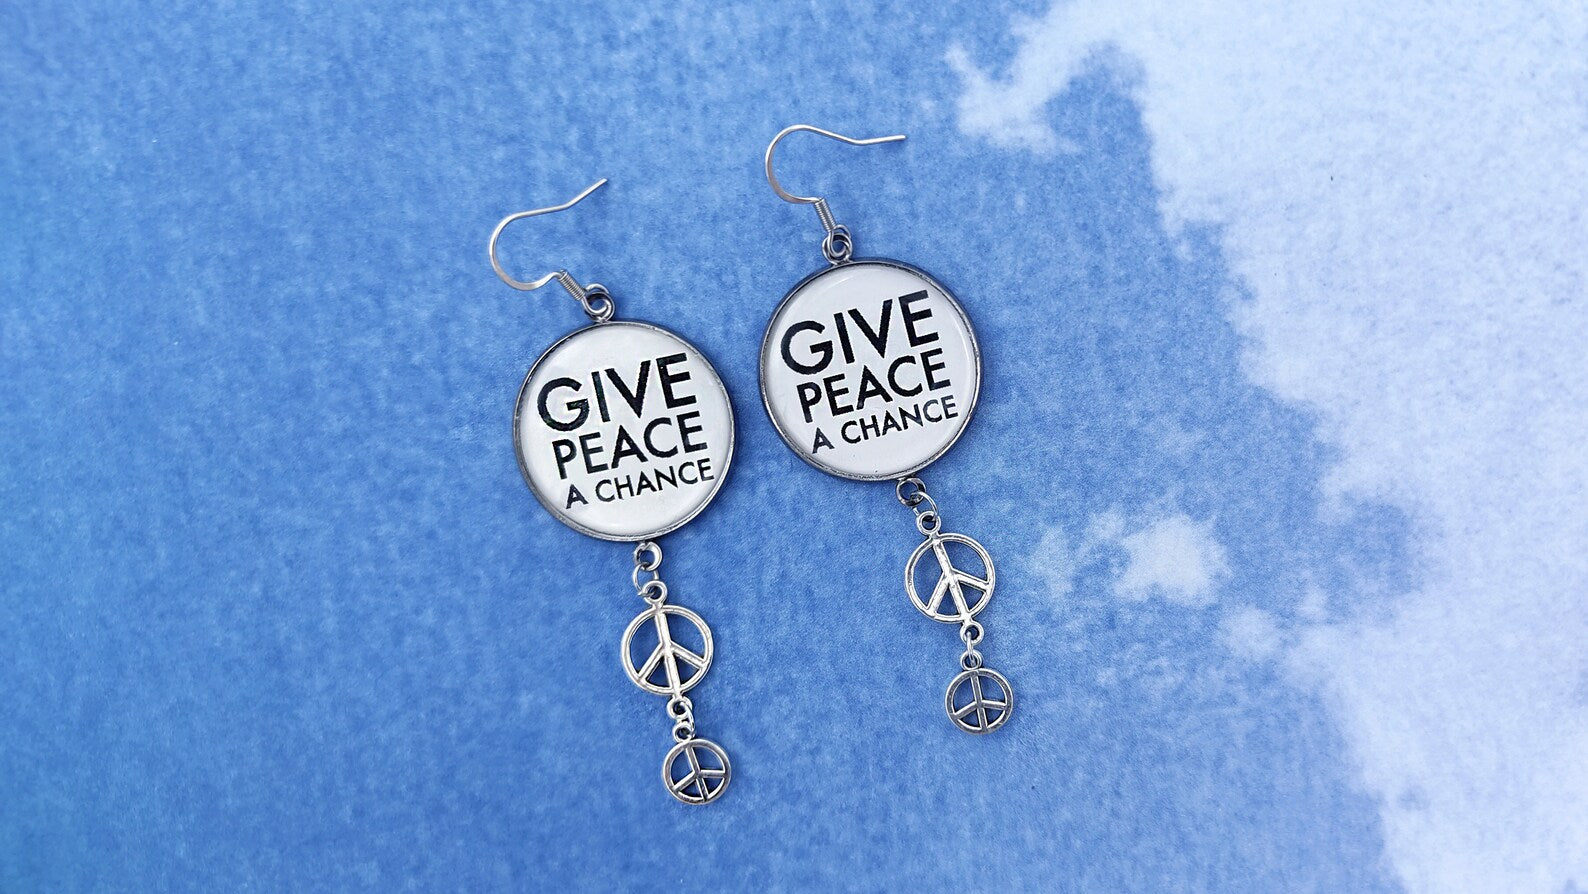 Give peace a chance earrings with blue background